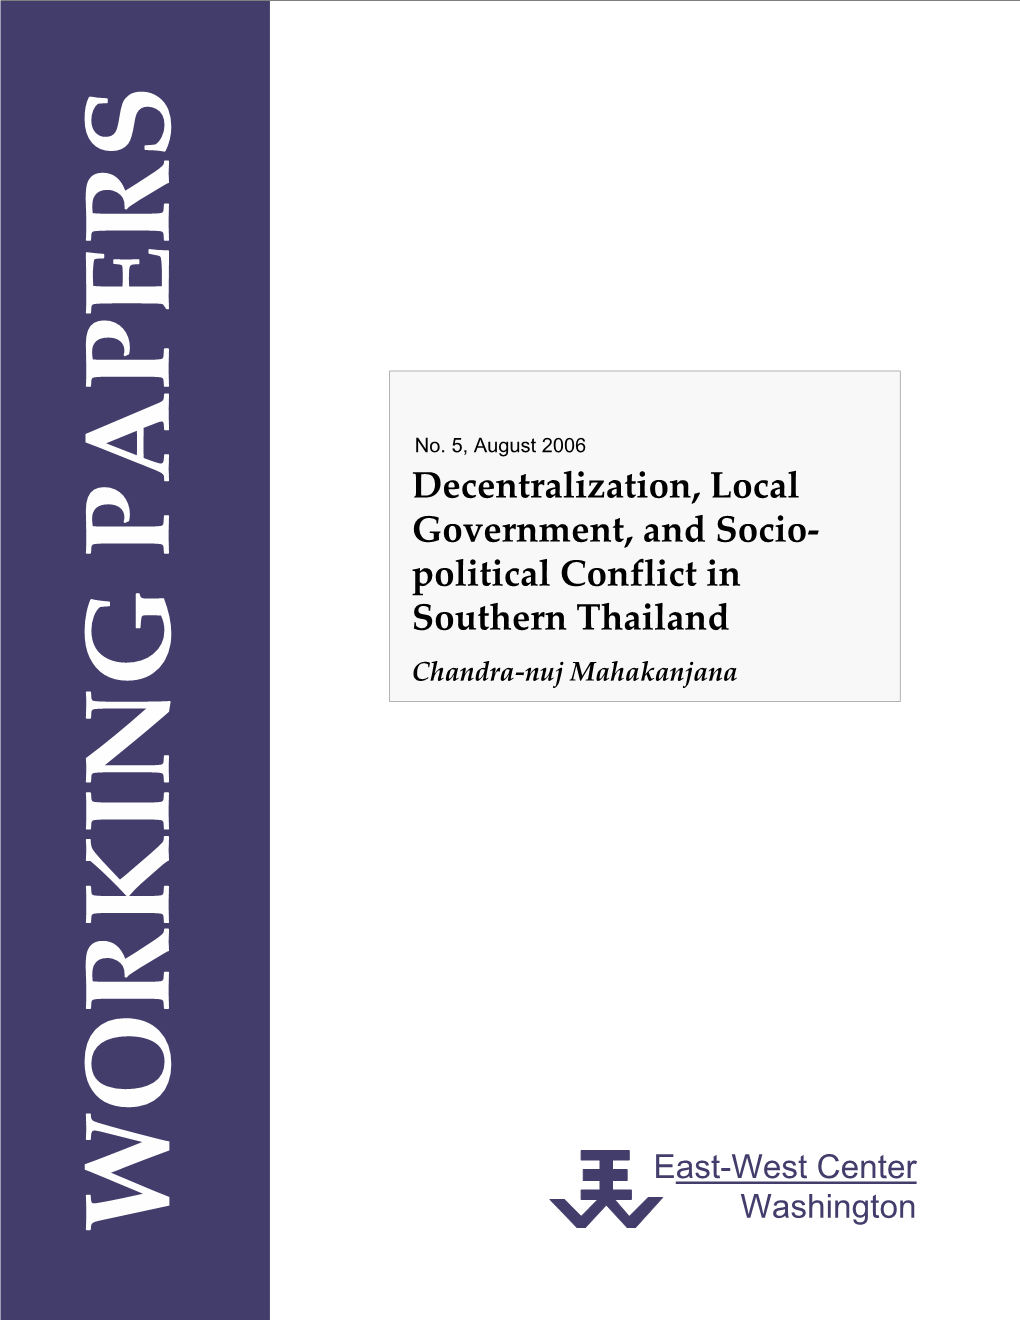 DRAFT Decentralization, Local Government, and Sociopolitical